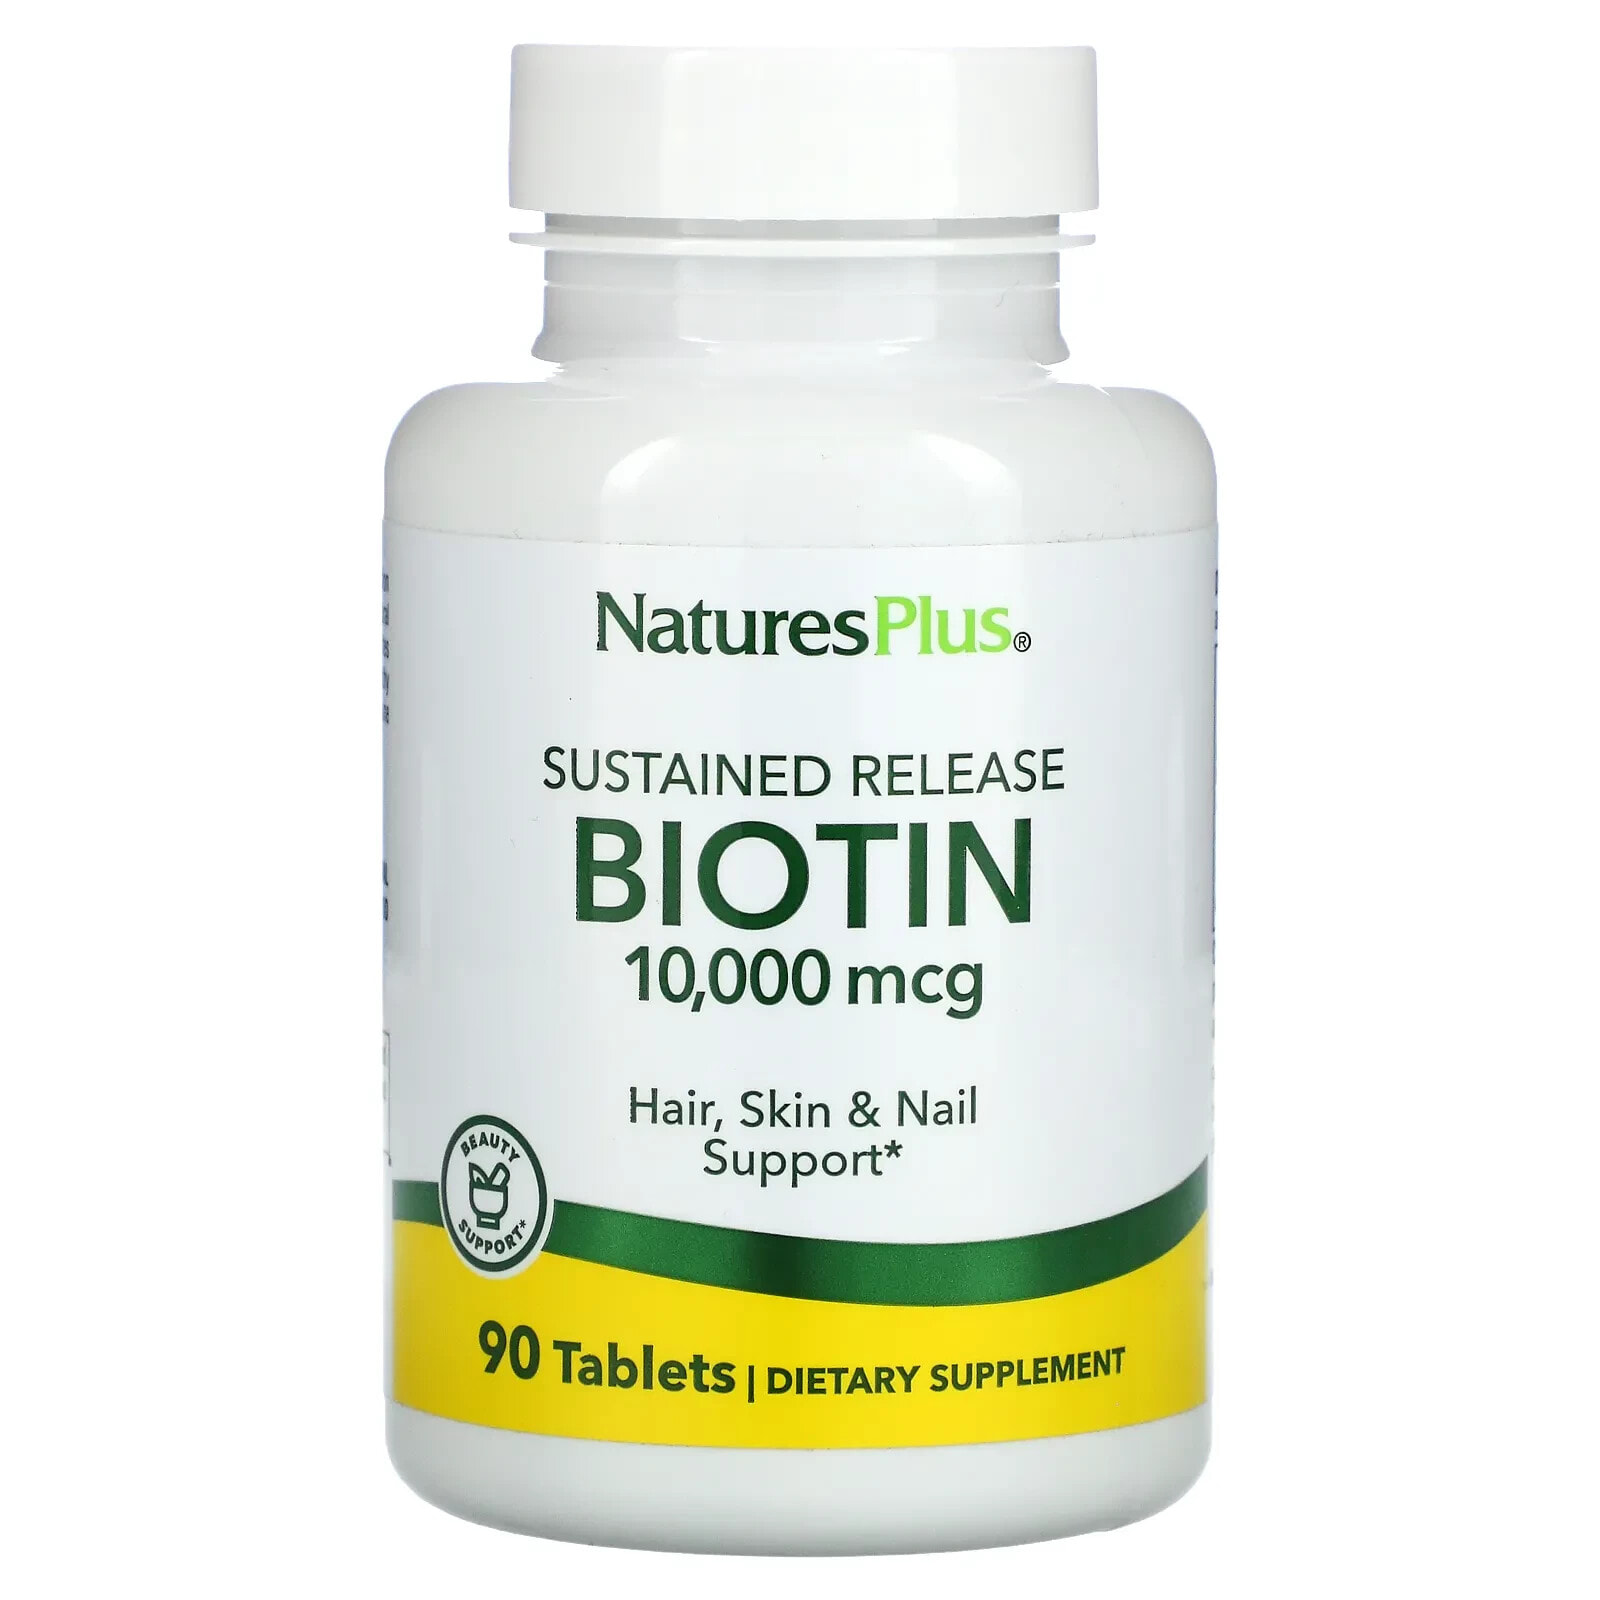 Biotin, Sustained Release, 10,000 mcg, 90 Tablets